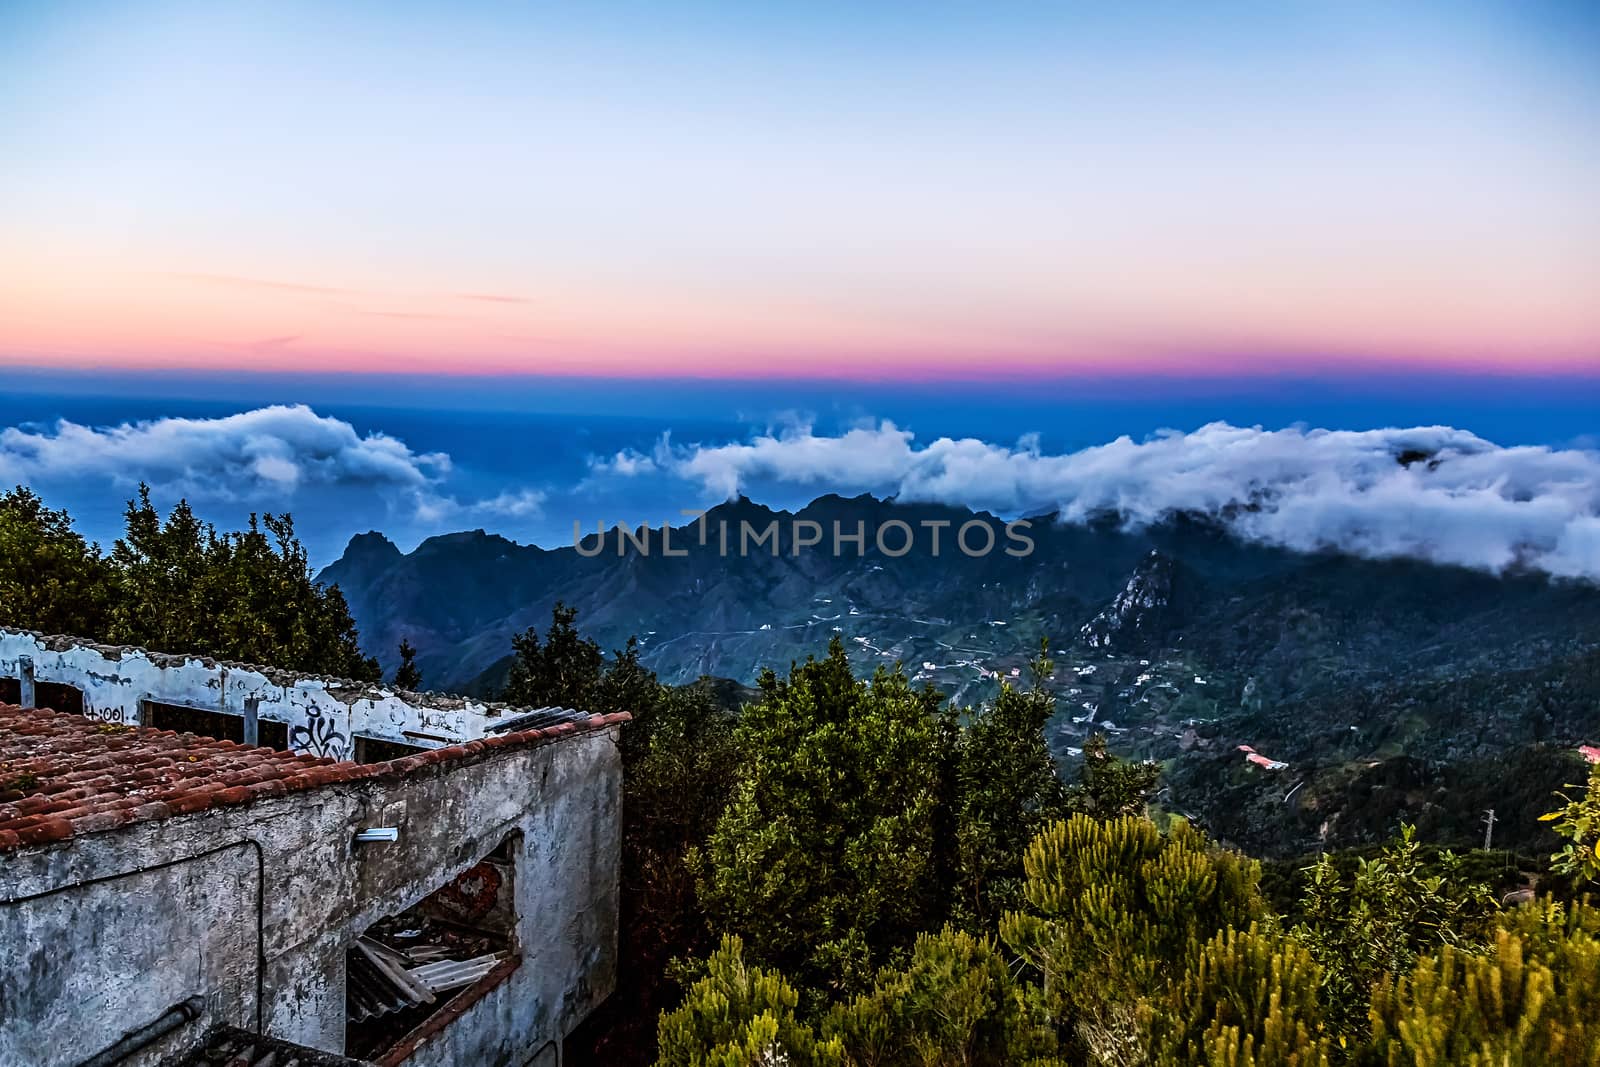 Mountain and clouds landscape with sky horizon and old building in Tenerife Canary island, Spain